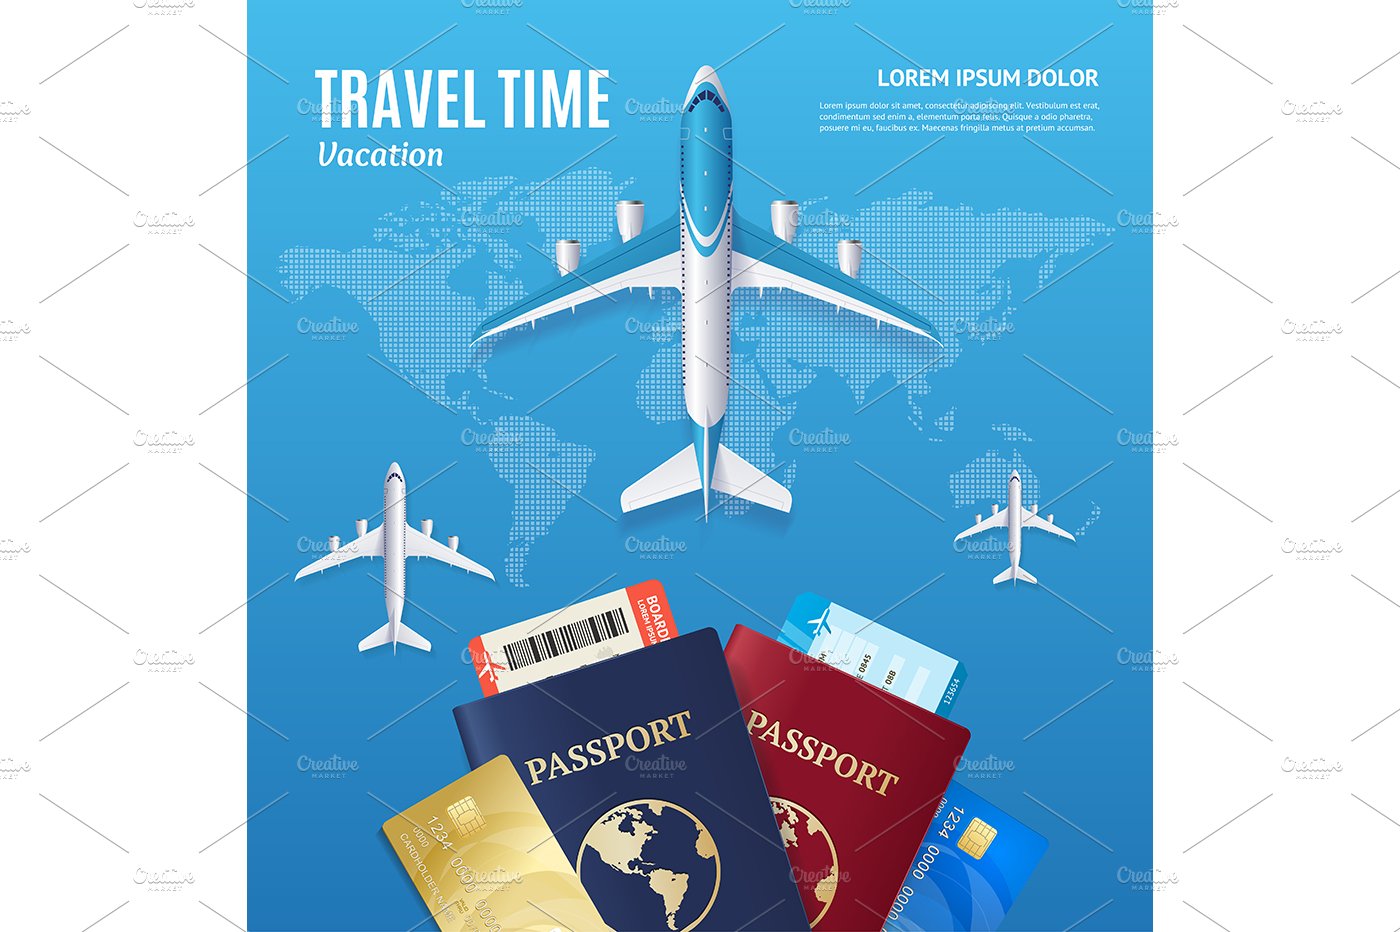 Travel Time Concept with Passport cover image.